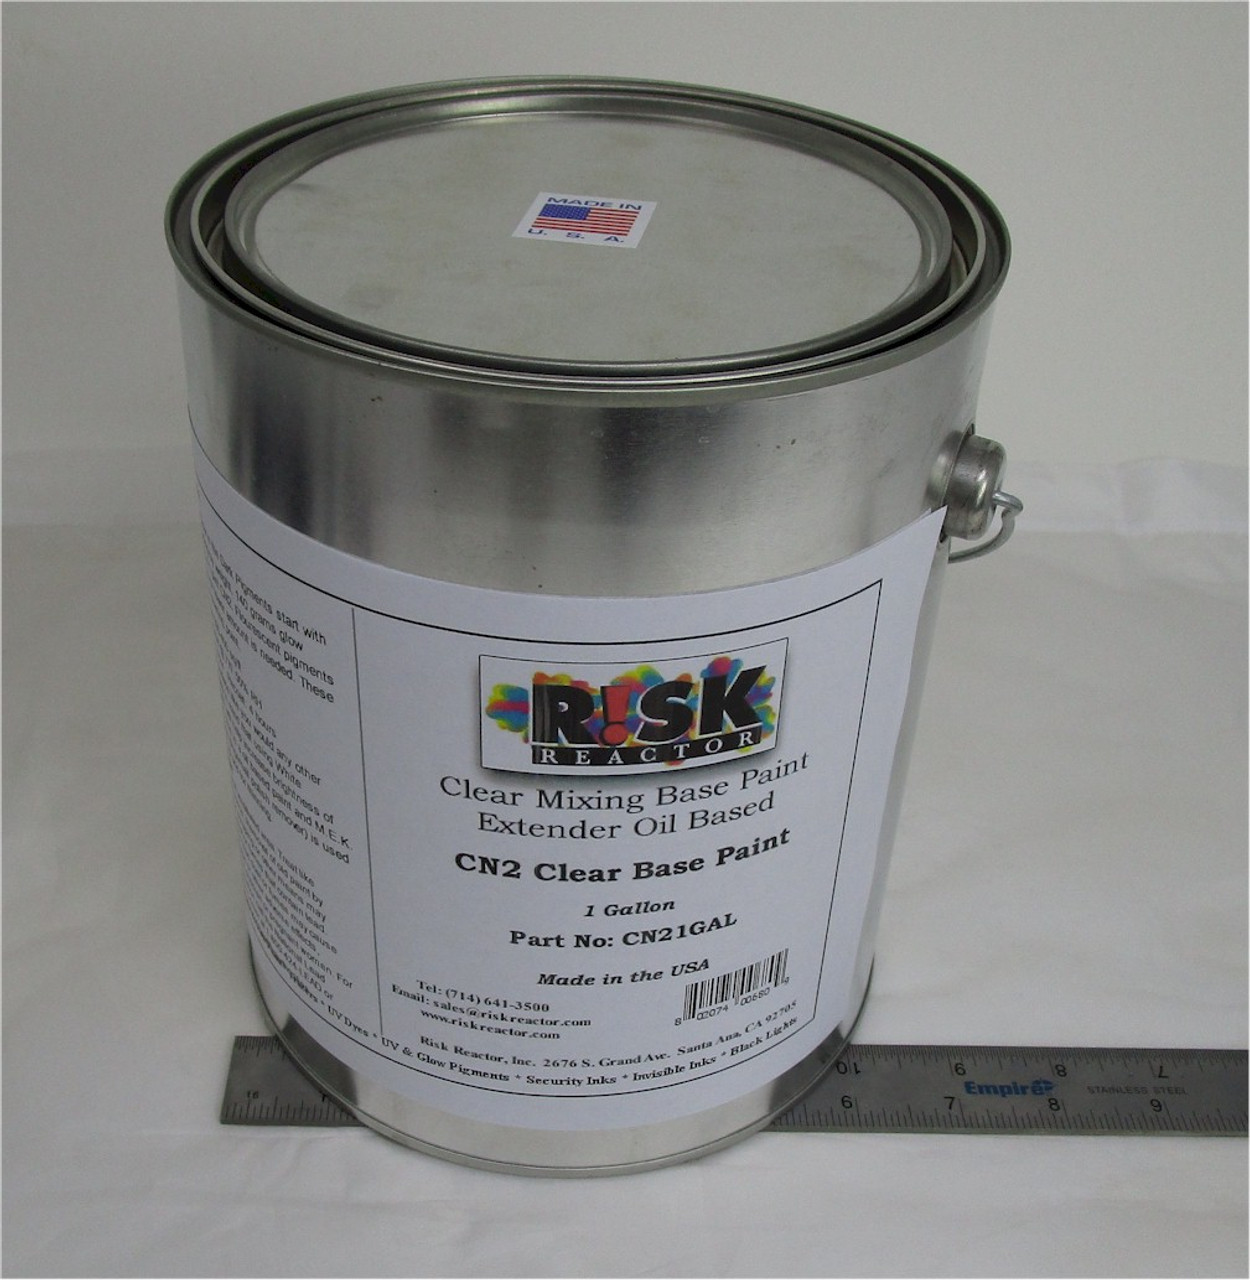 CN21GAL One Gallon Wholesale Clear Resin Paint for Mixing Glow Powders